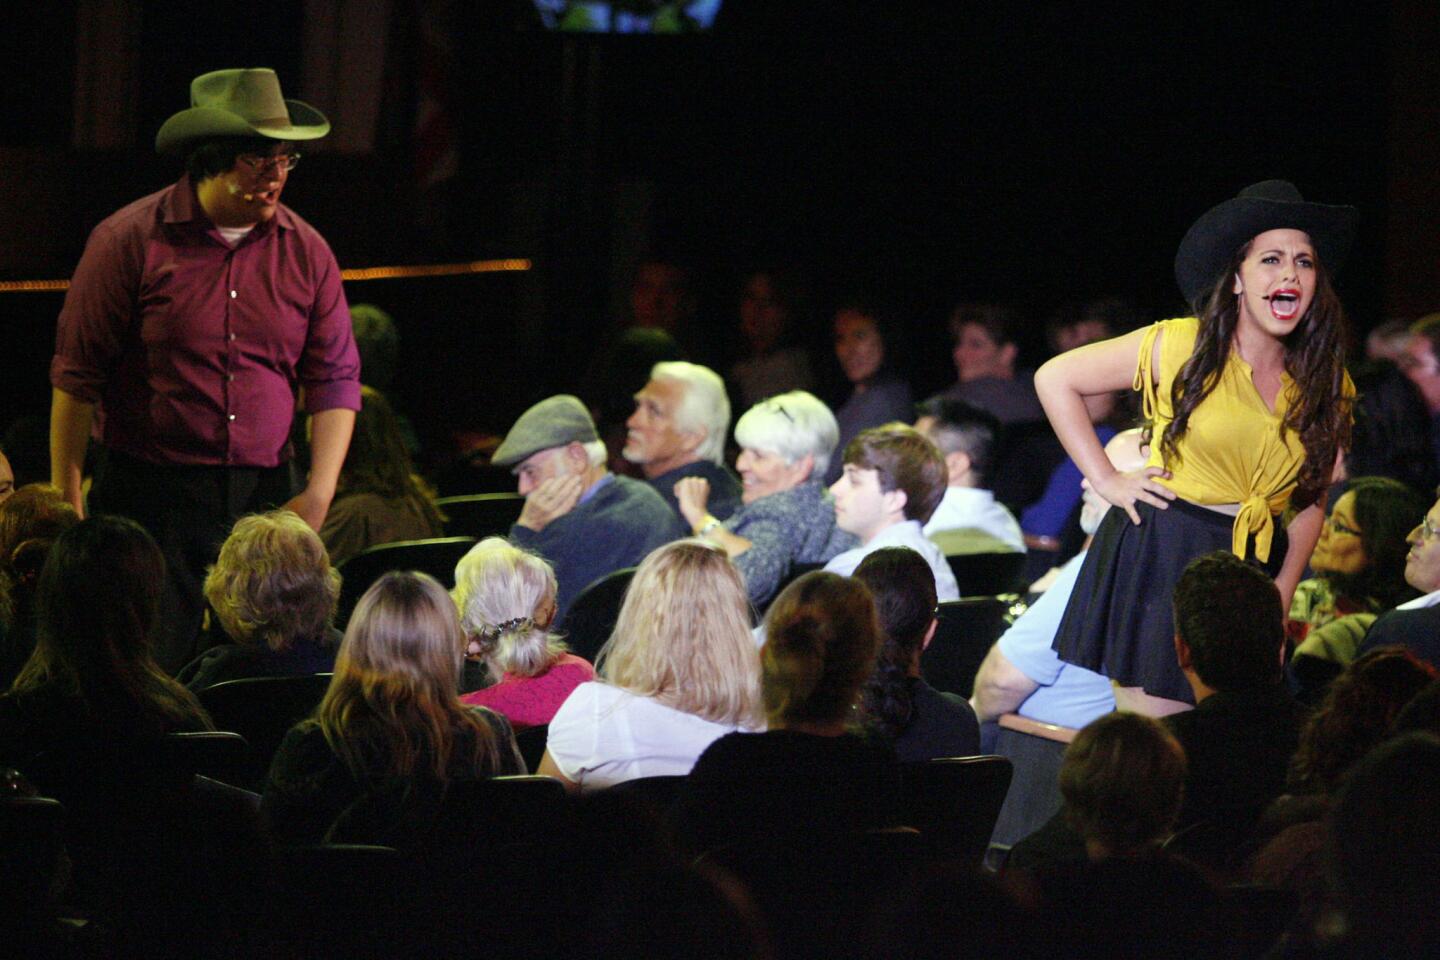 Michael Dieguez, left, and Annmarie Rizzo perform during a John Burroughs High School Vocal Music Assn. performance, "Burroughs on Broadway," which took place at John Burroughs High School in Burbank on Friday, October 12, 2012.